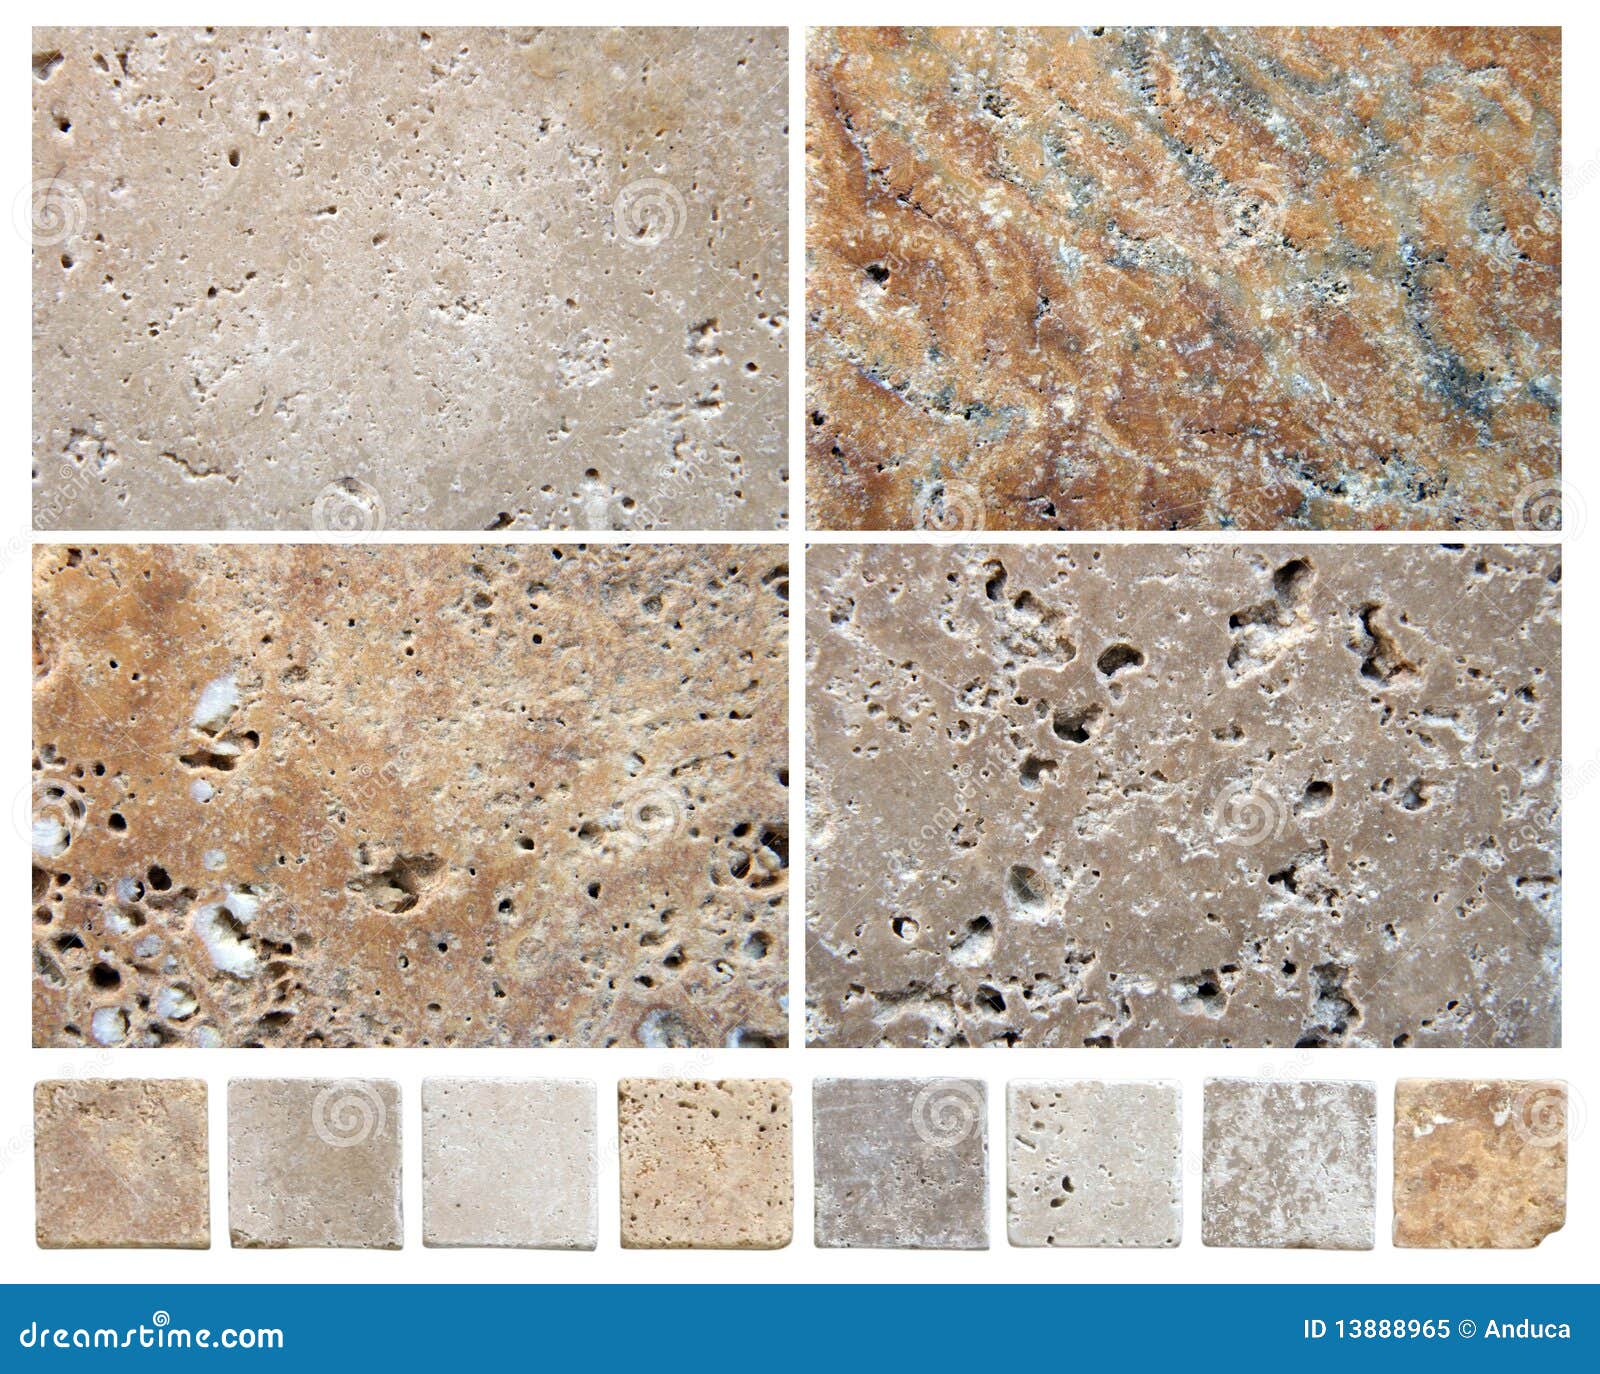 natural stone textures